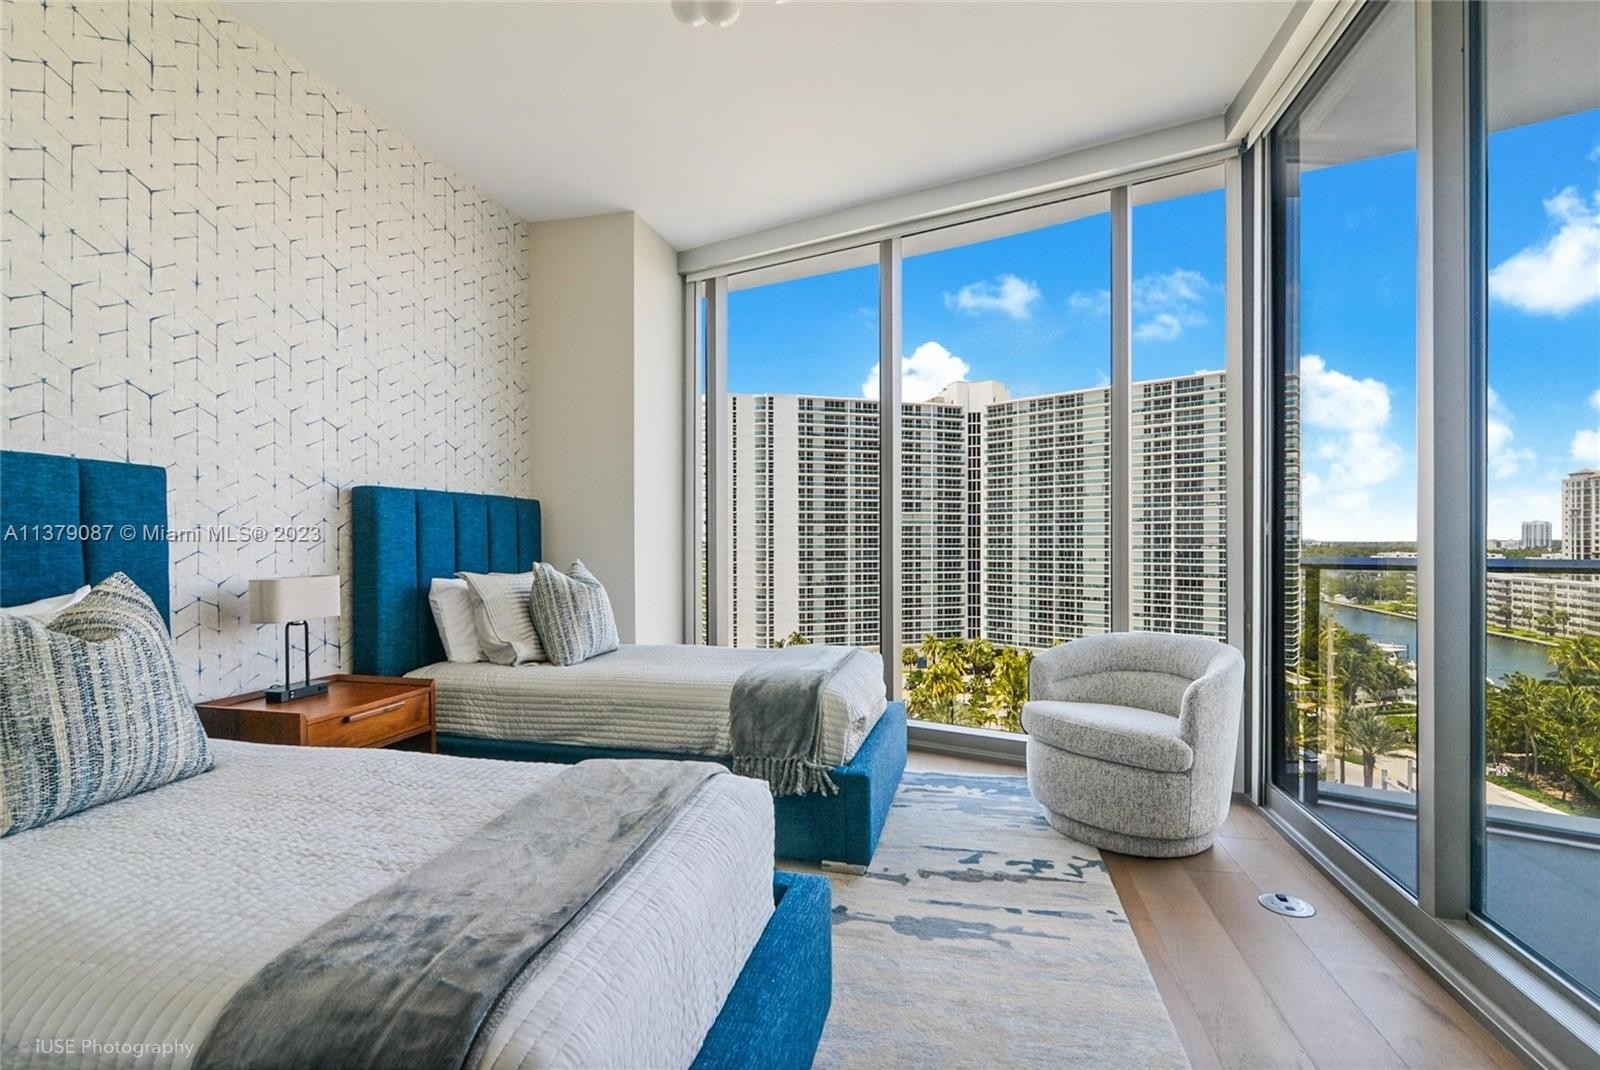 6. Condominiums for Sale at 15701 Collins Ave, 705 Sunny Isles Beach, FL 33160